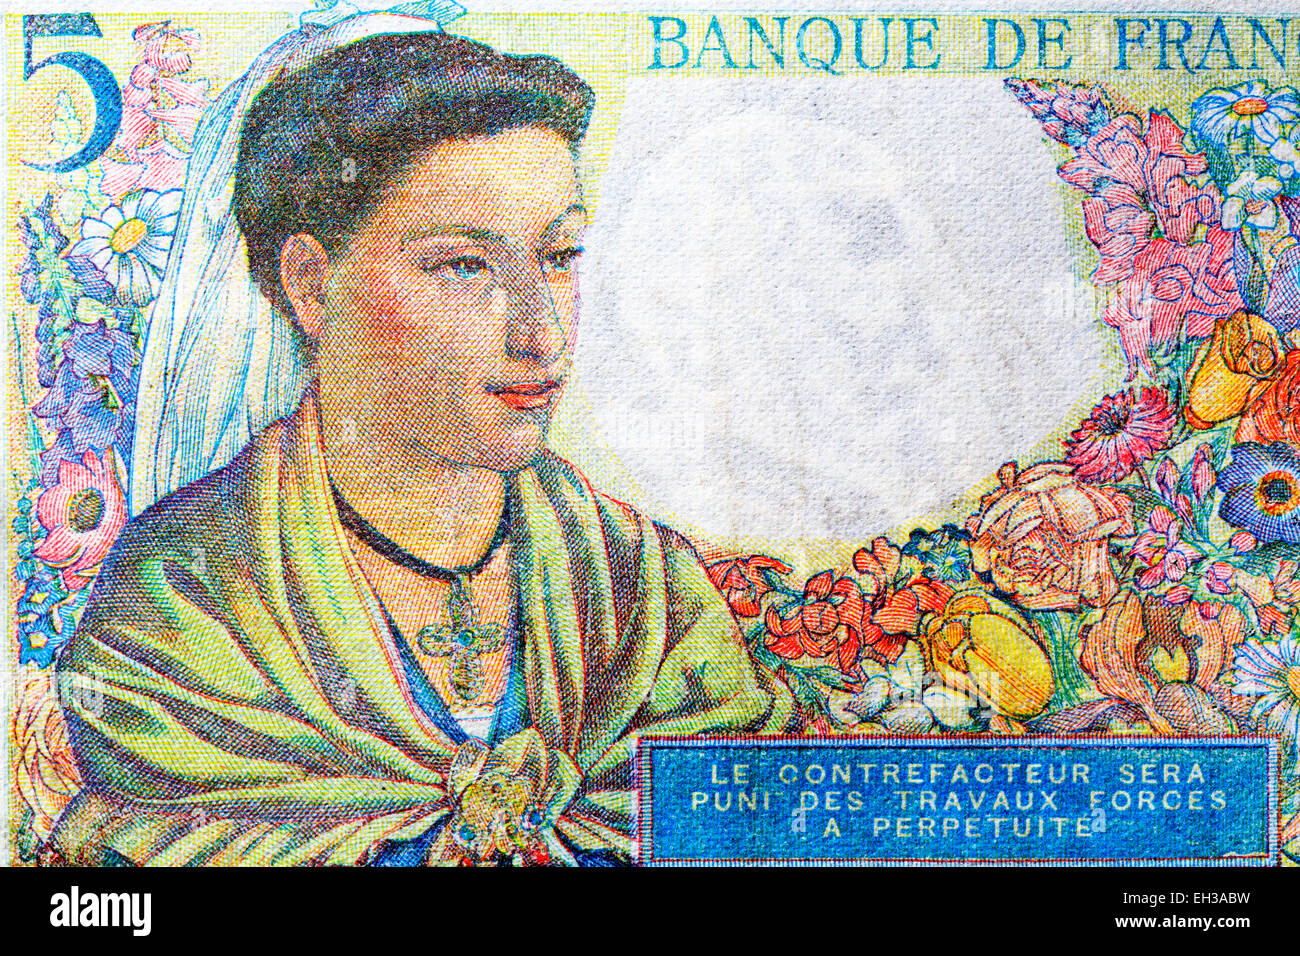 Aquitaine woman from 5 francs banknote, France, 1945 Stock Photo